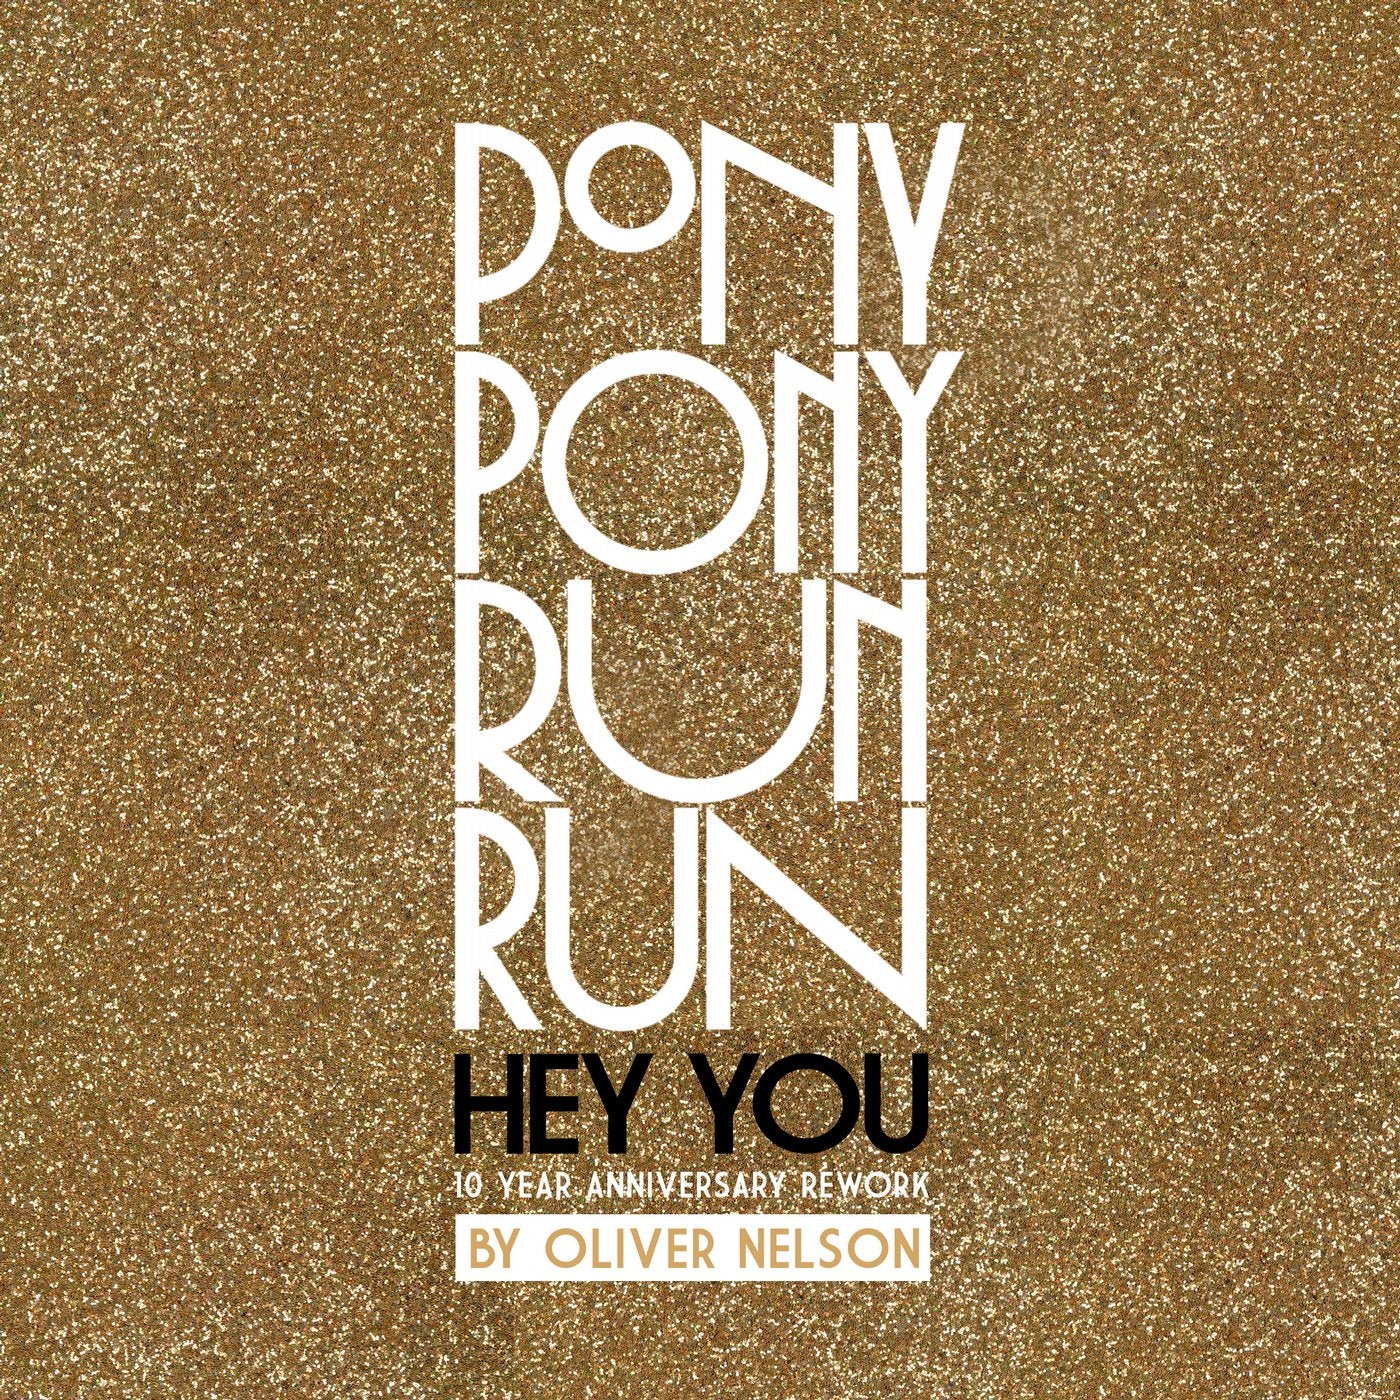 Hey You (10-Year Anniversary Rework by Oliver Nelson)